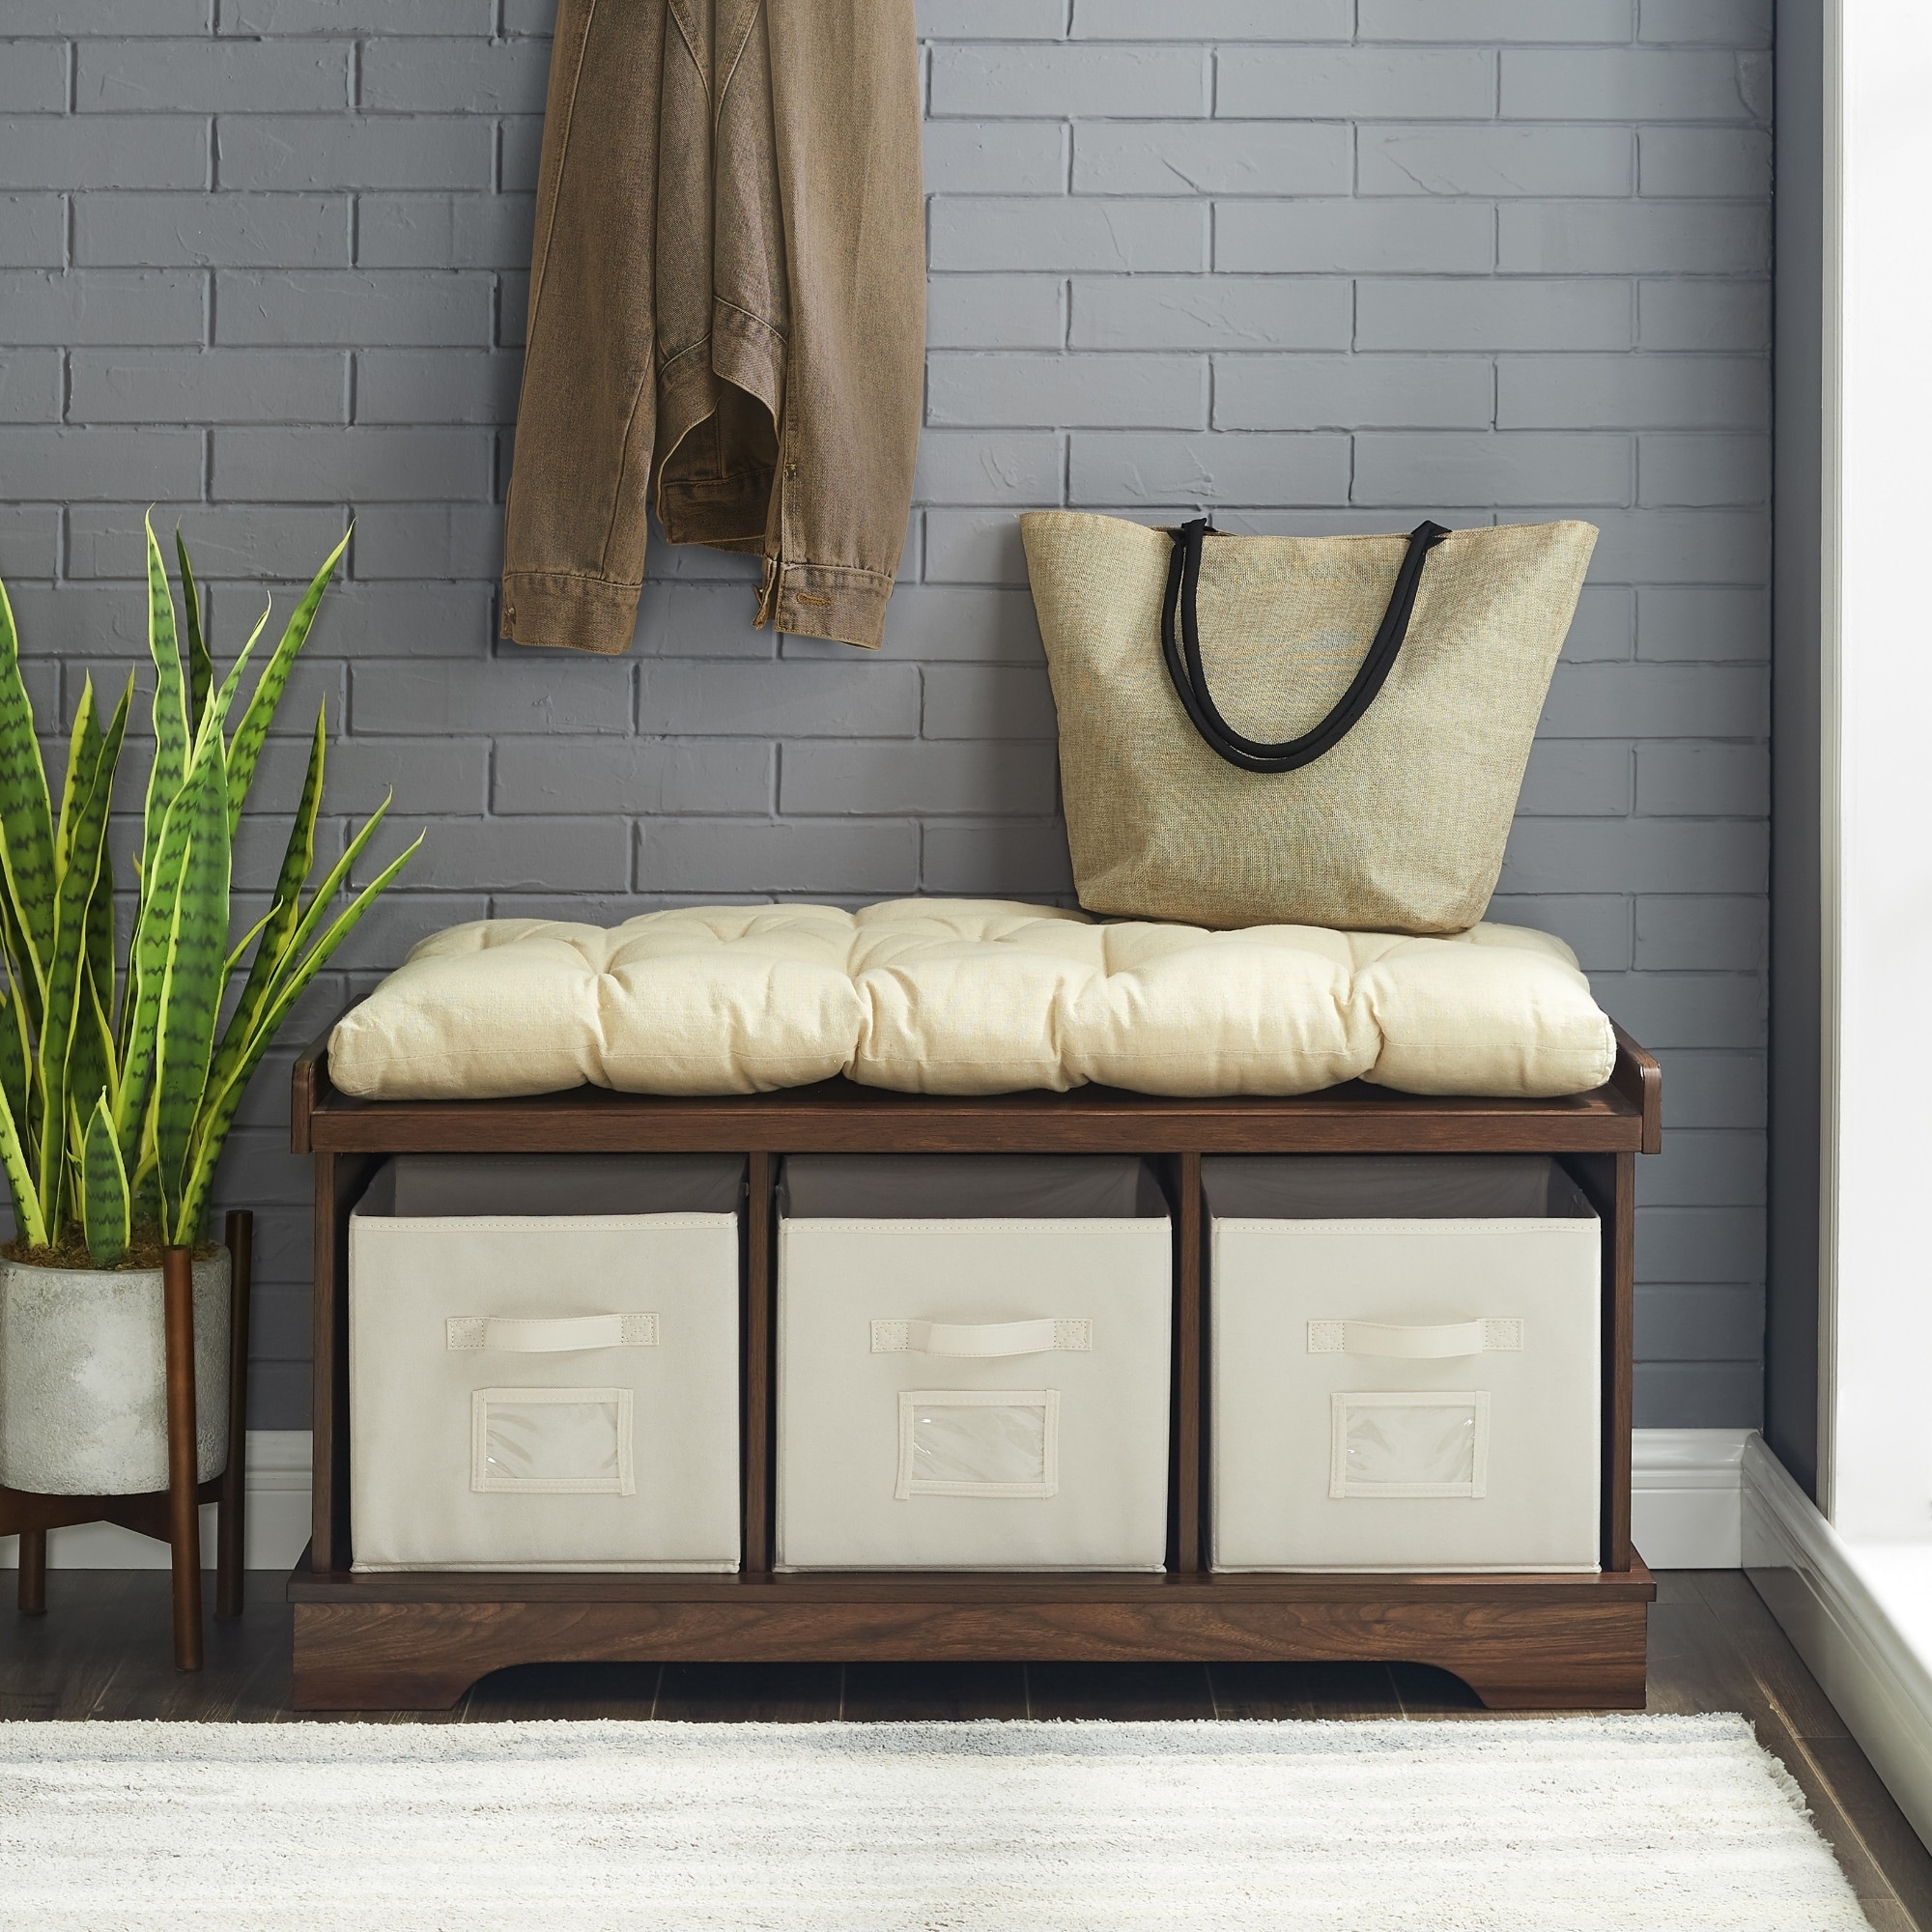 storage bench with cushion and baskets